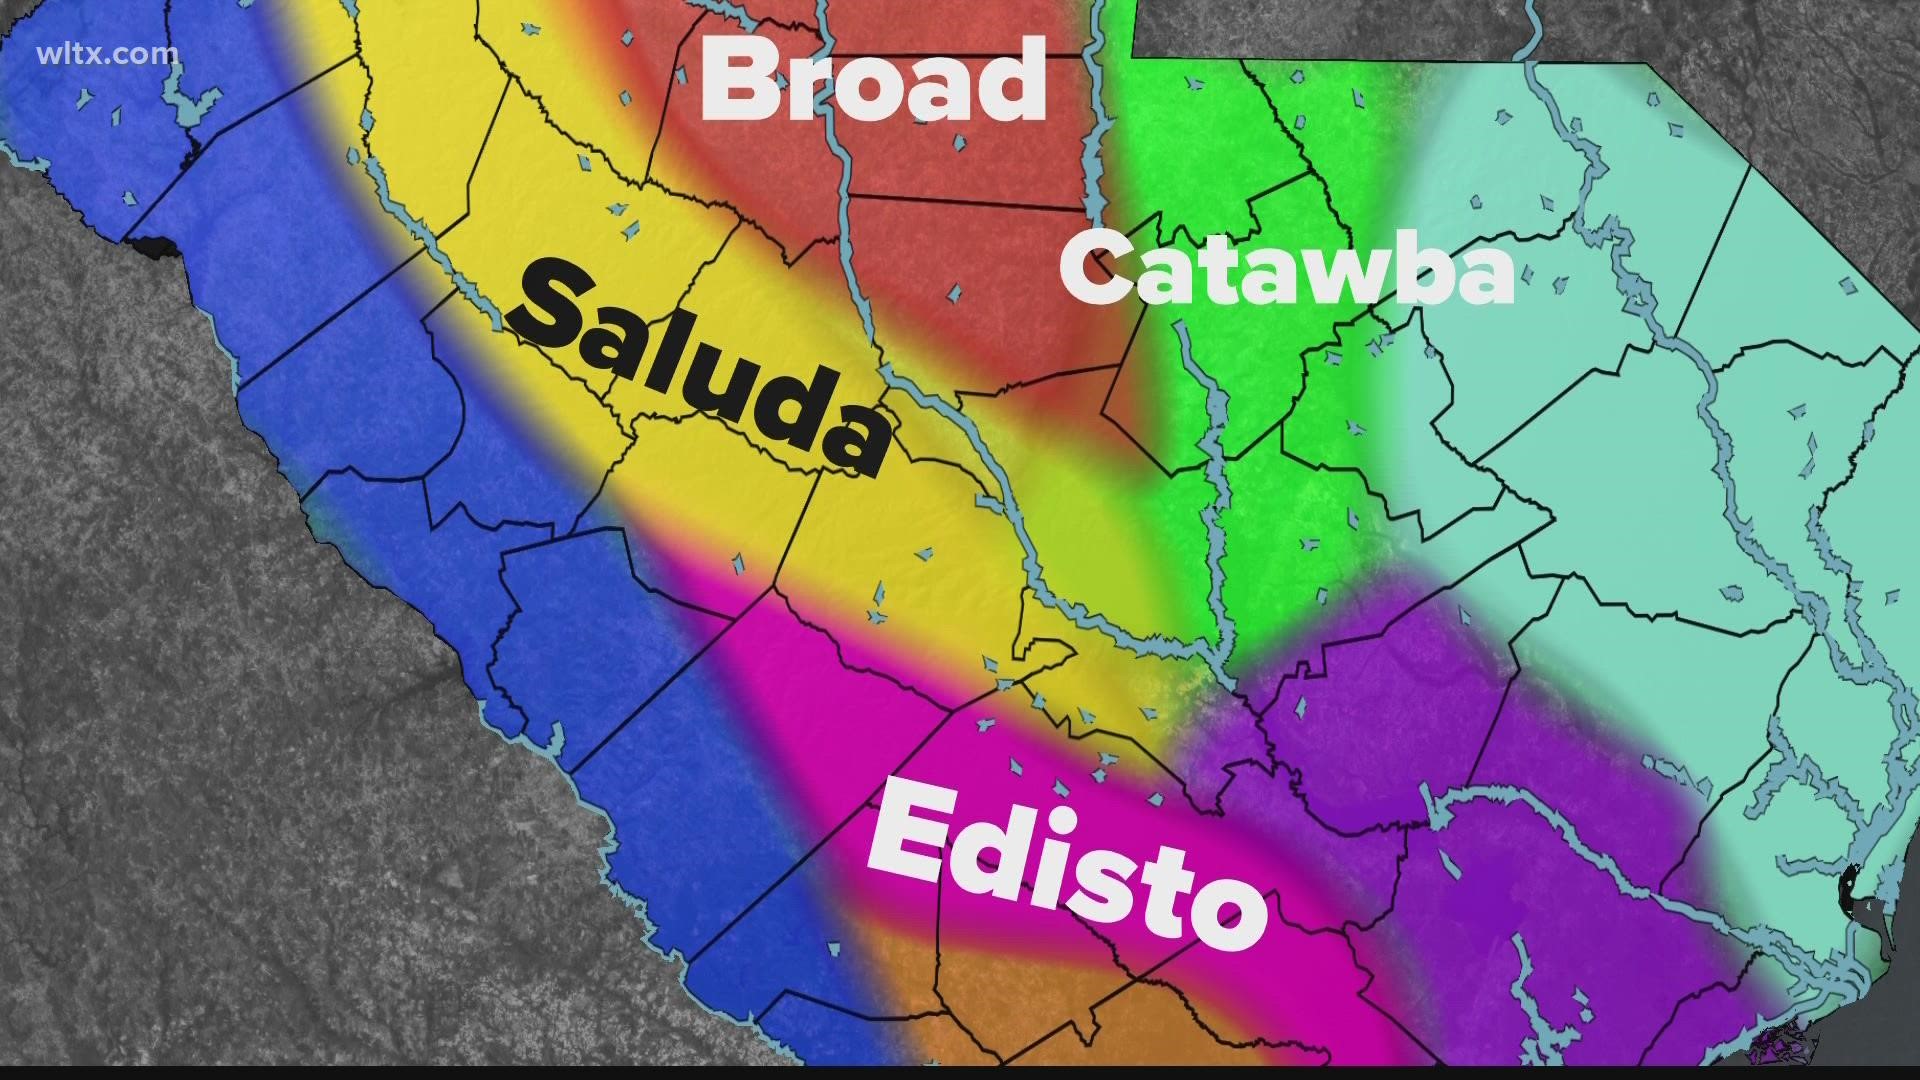 Columbia is made up of many watersheds including the Saluda, Broad, Catawba, and Edisto.